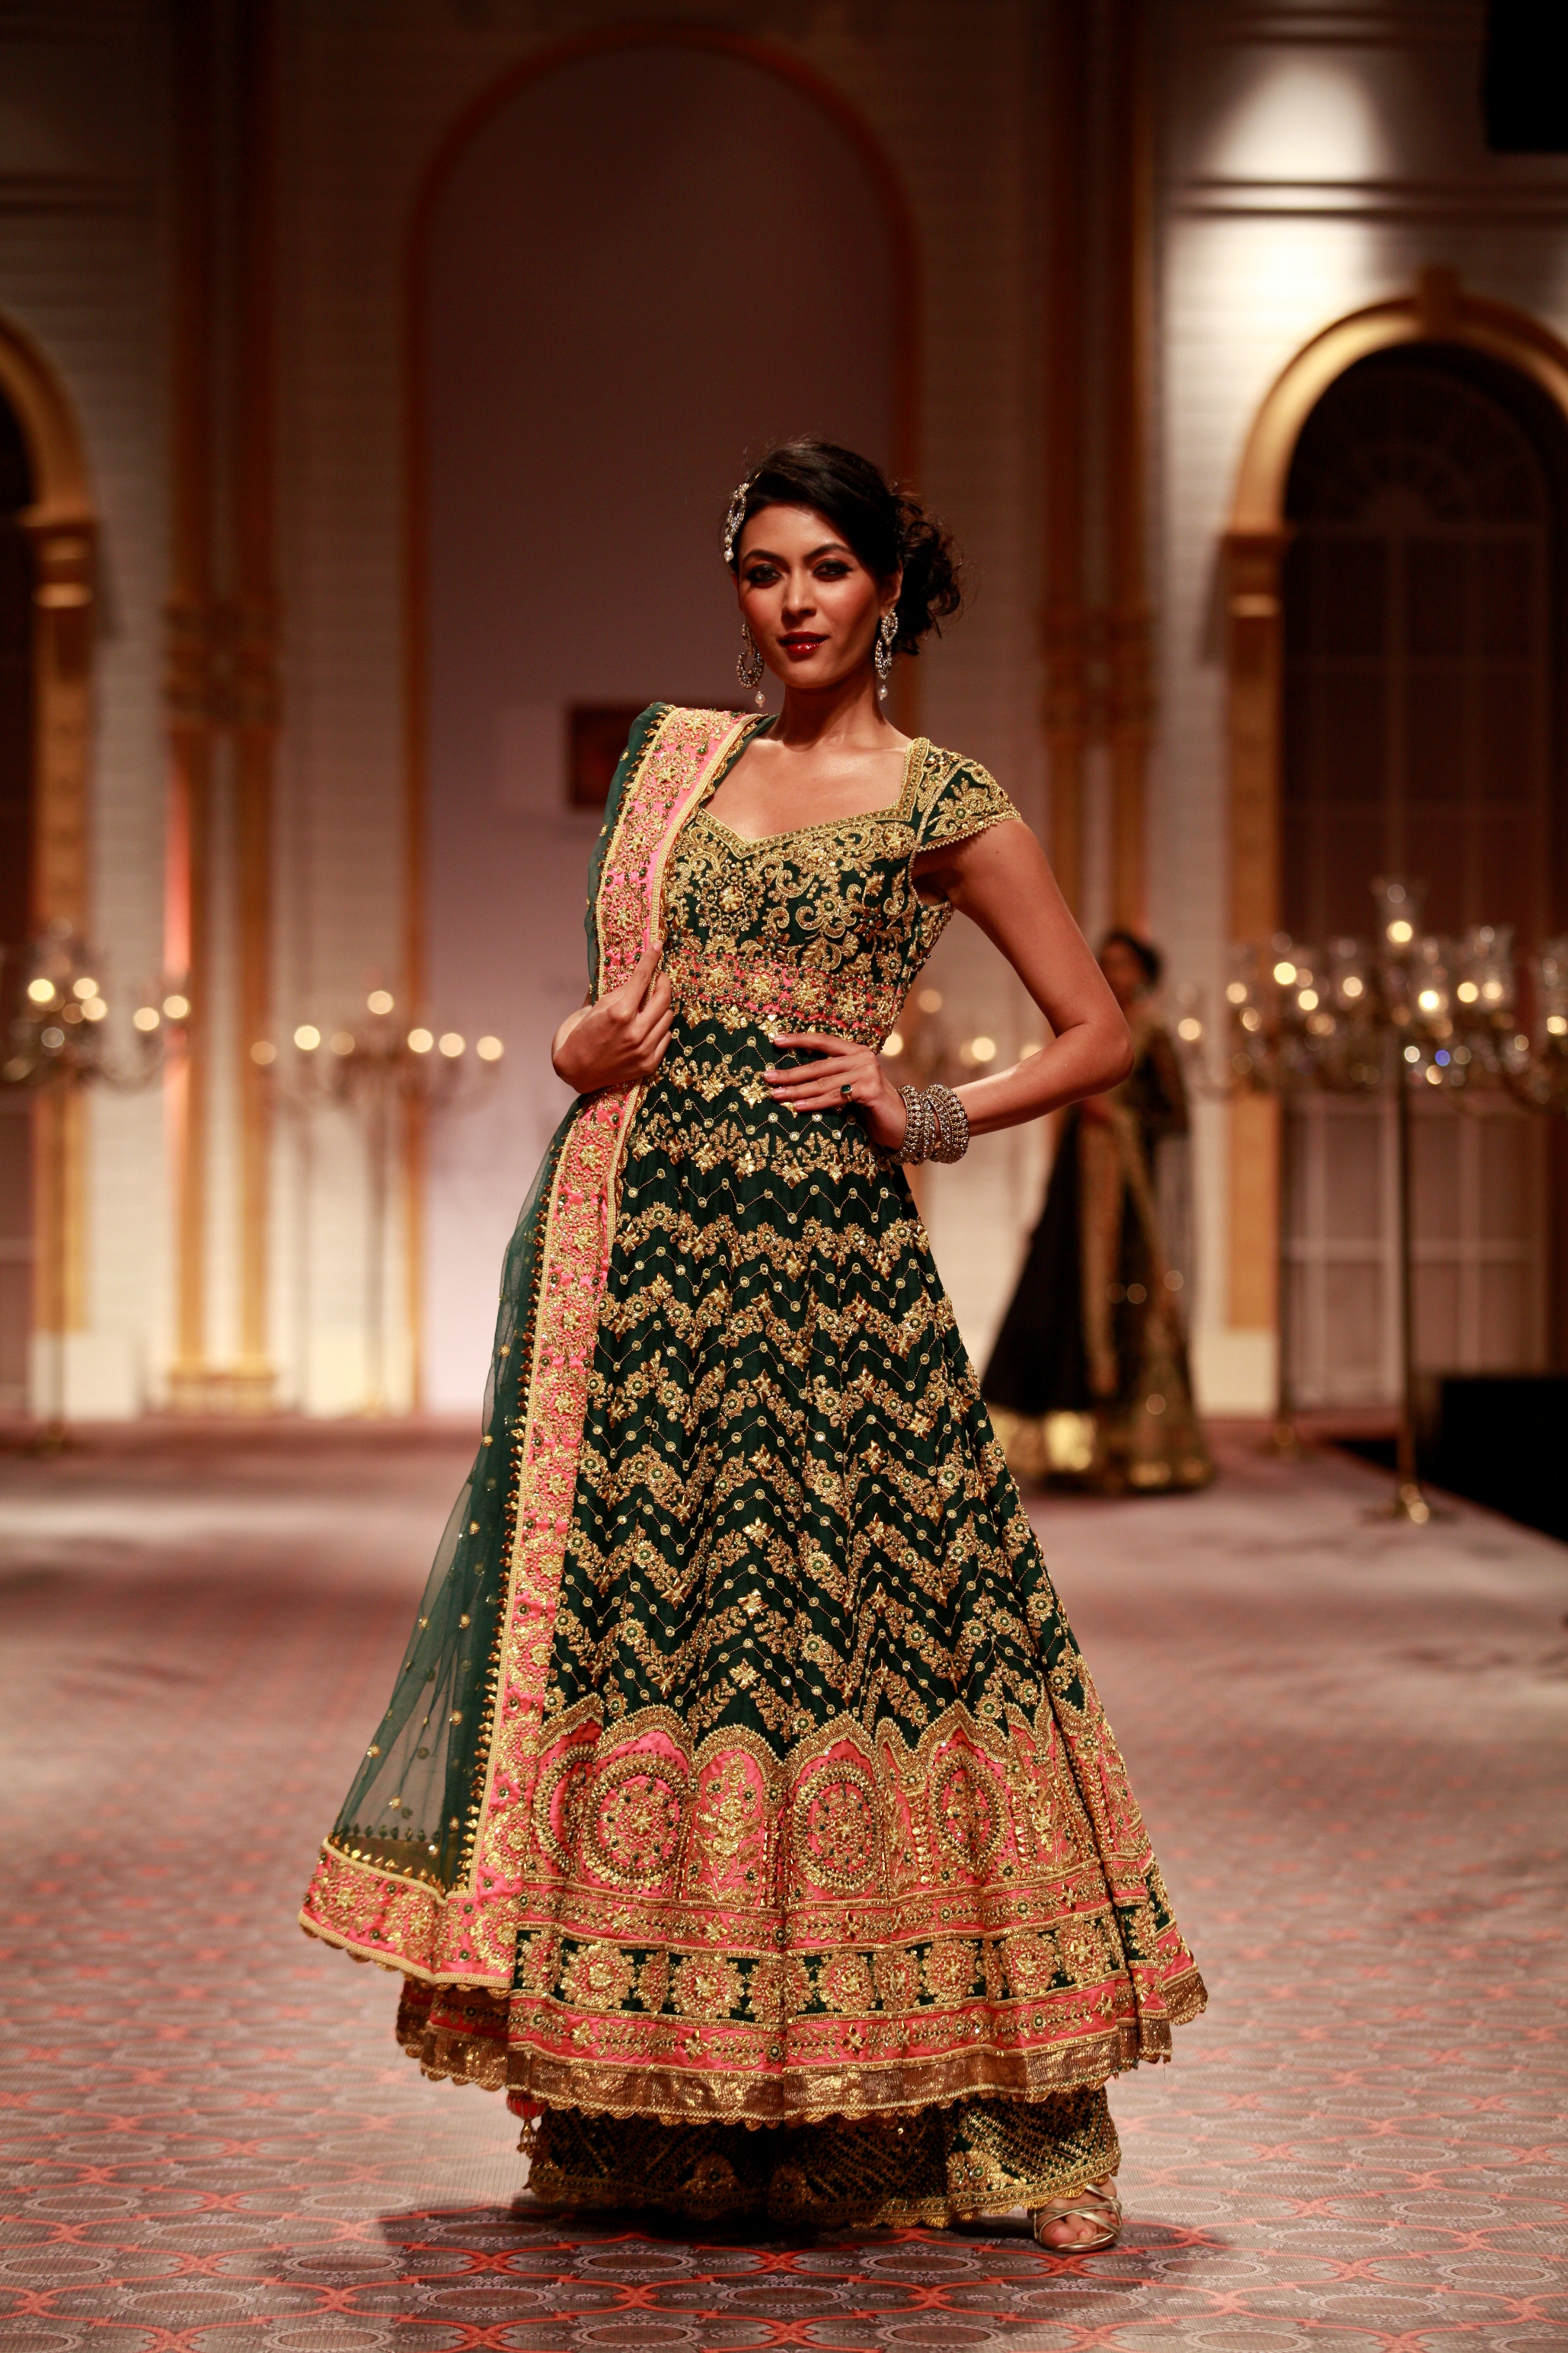 Seen at Aamby Valley India Bridal Fashion Week - Day 5- Model walking for Preeti S Kapoor-1 (16)